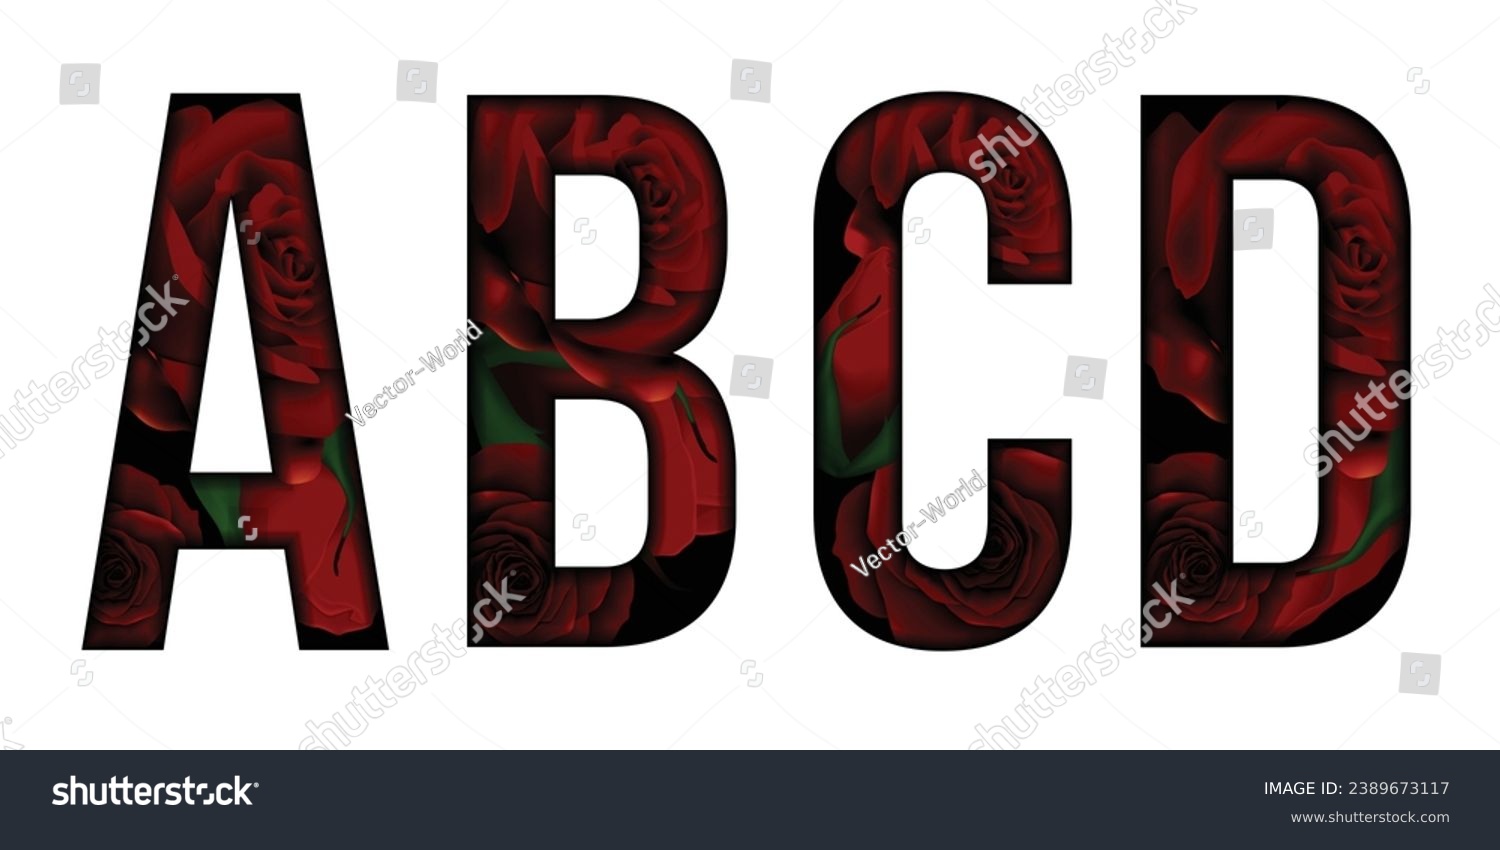 SVG of Red roses flower font Alphabet a, b, c, d, text effect. Made of Real rose with Precious paper cut shape of letter. Collection of brilliant roses font for unique decoration in spring concept idea svg